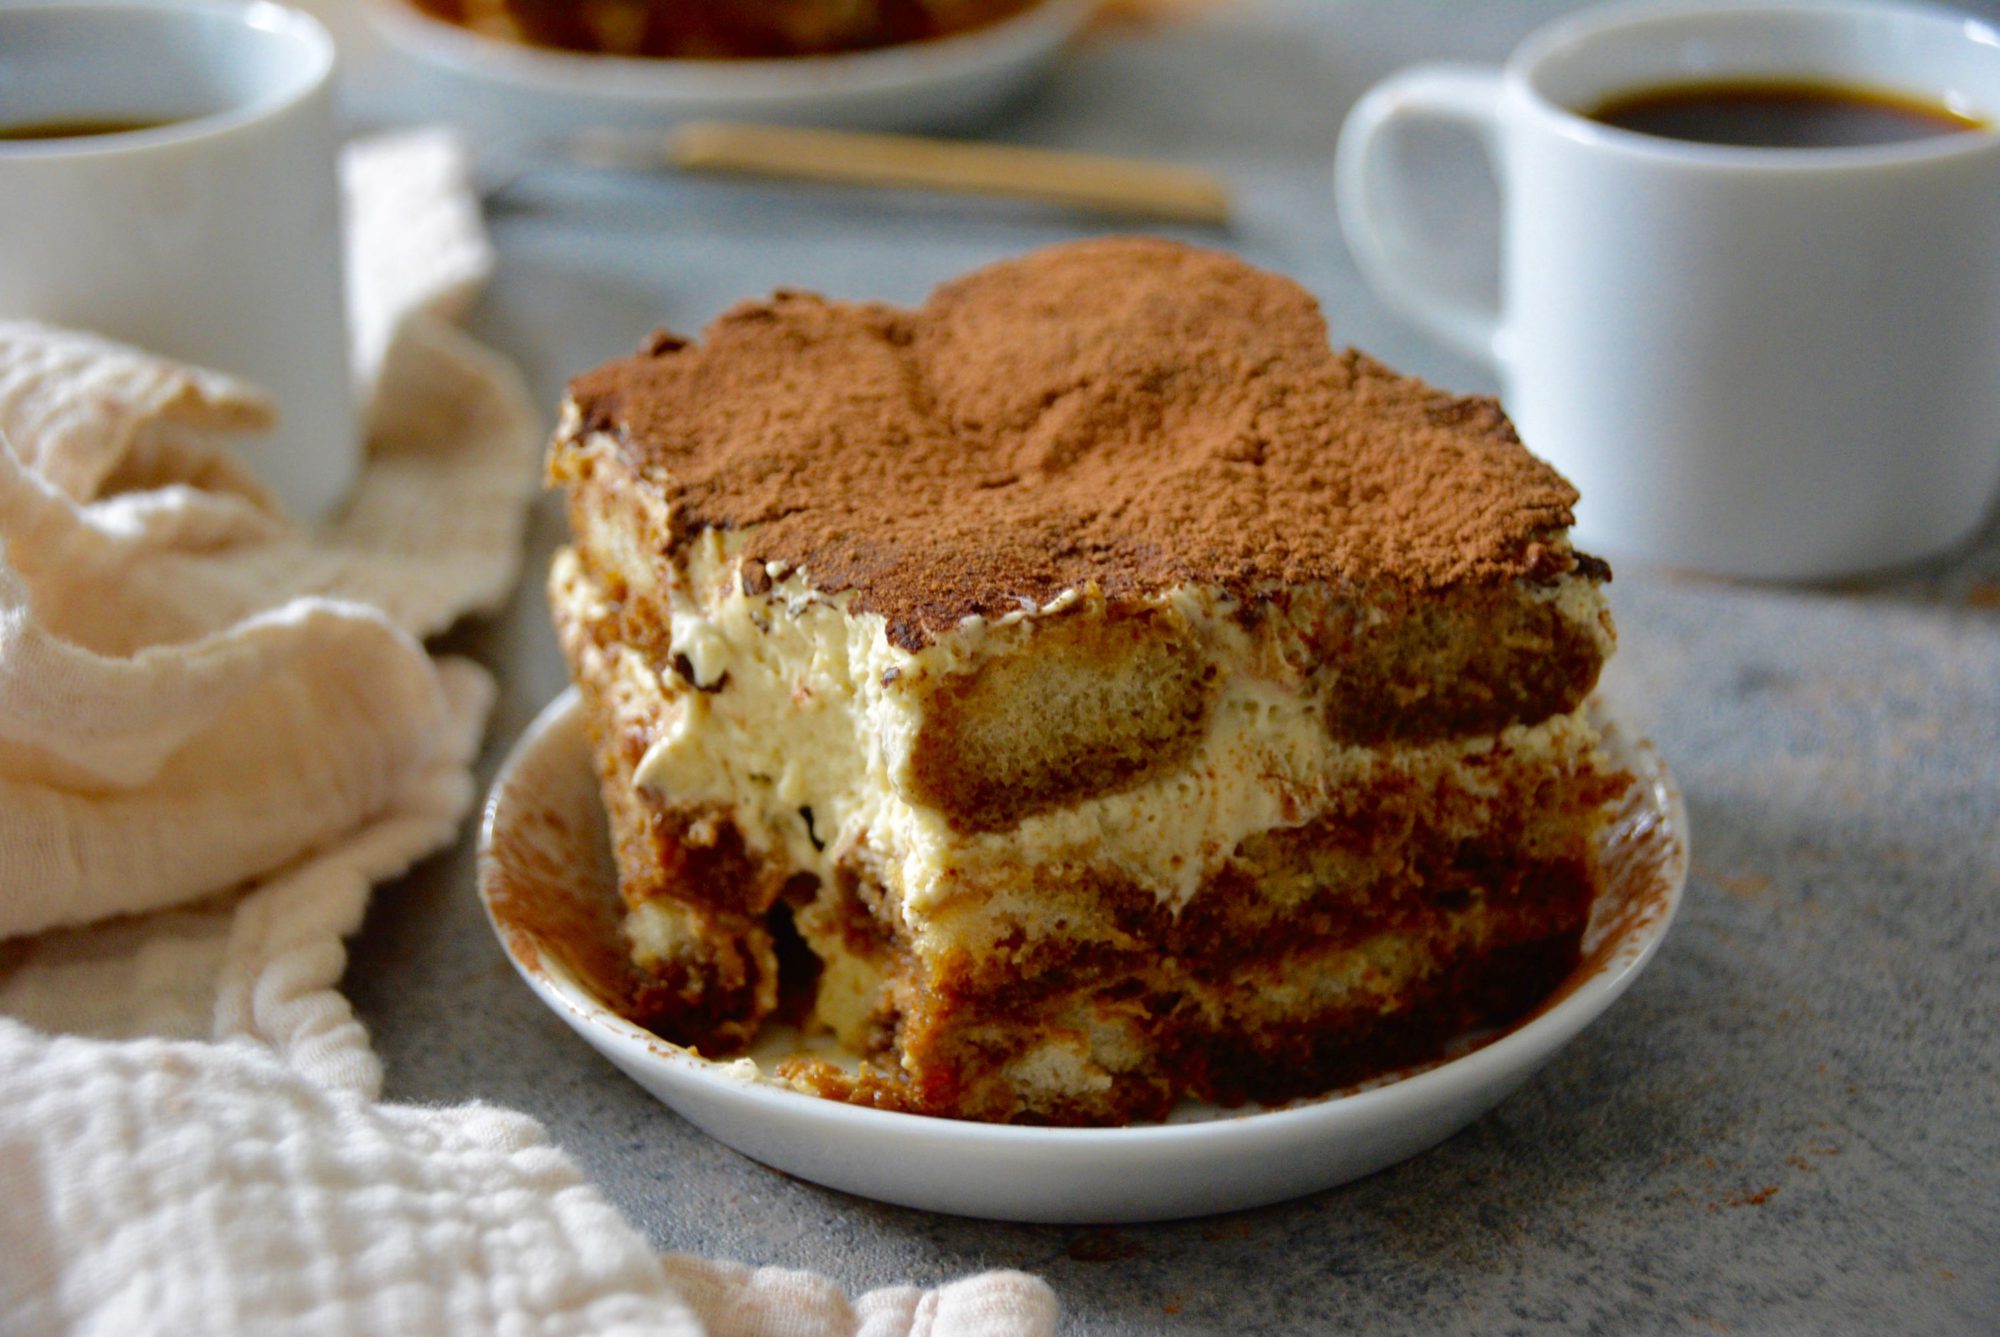 tiramisu on a plate with coffee cups in background